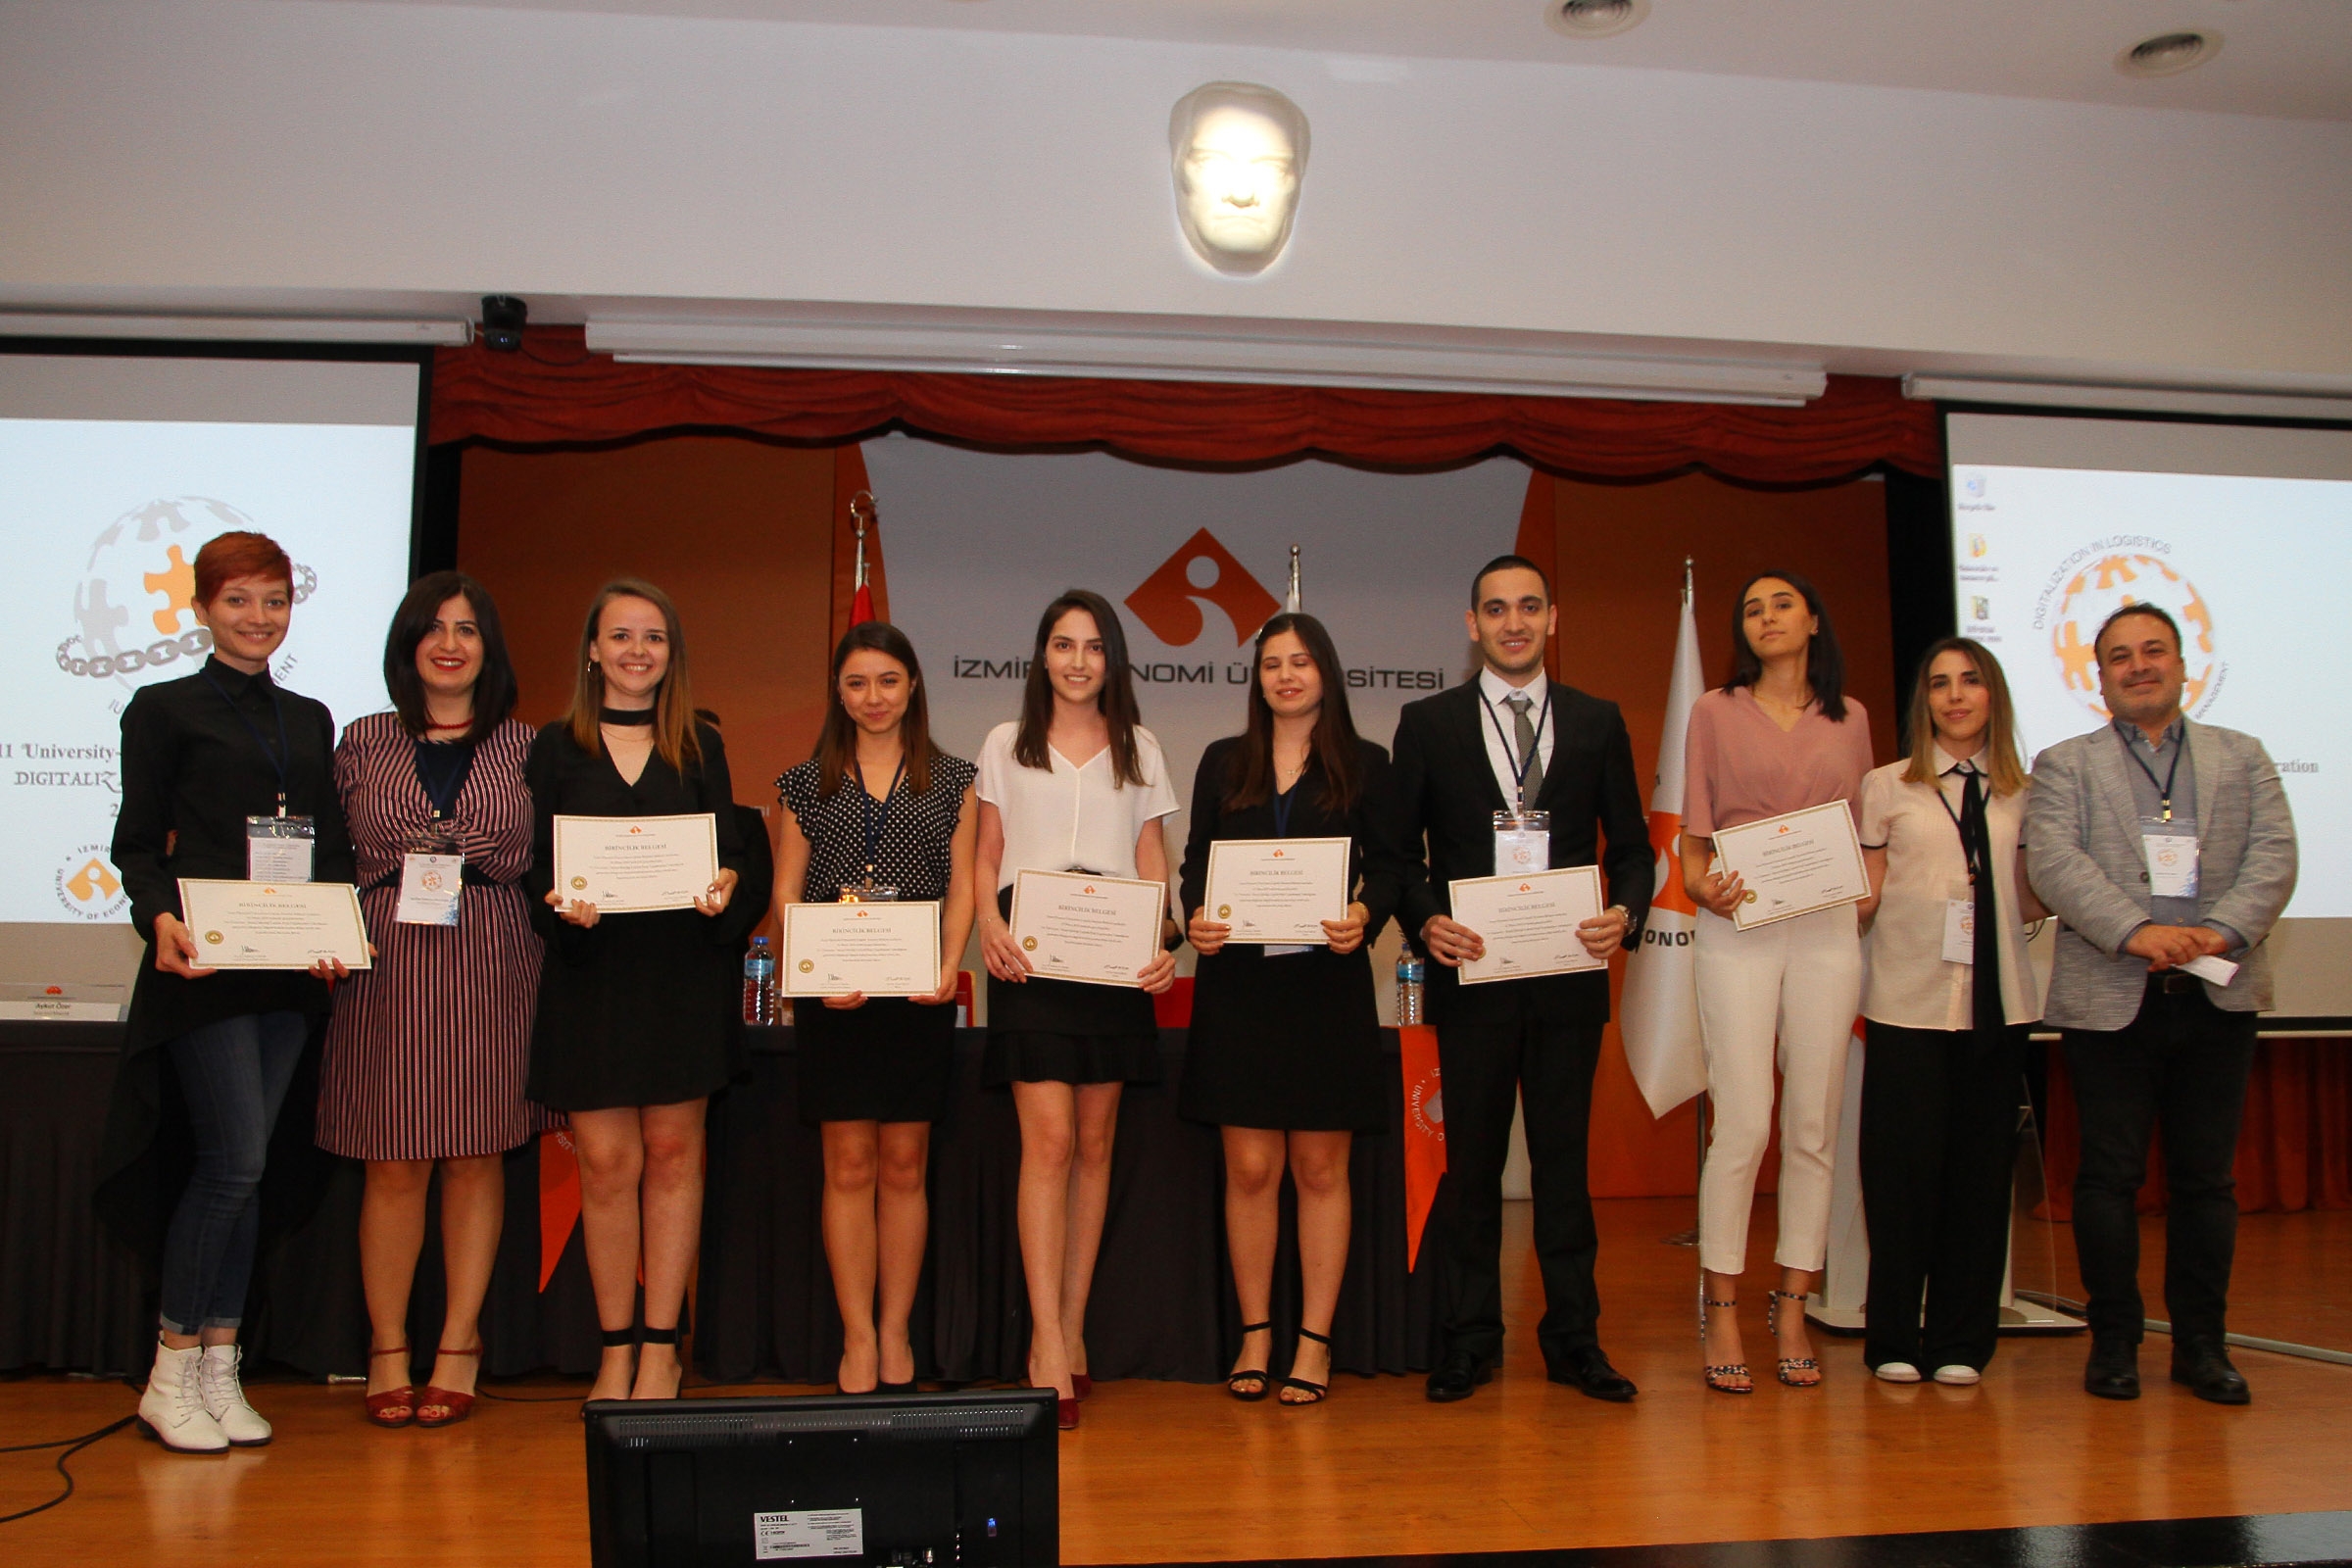 IUE logısticians get full mark for their projects from the business world